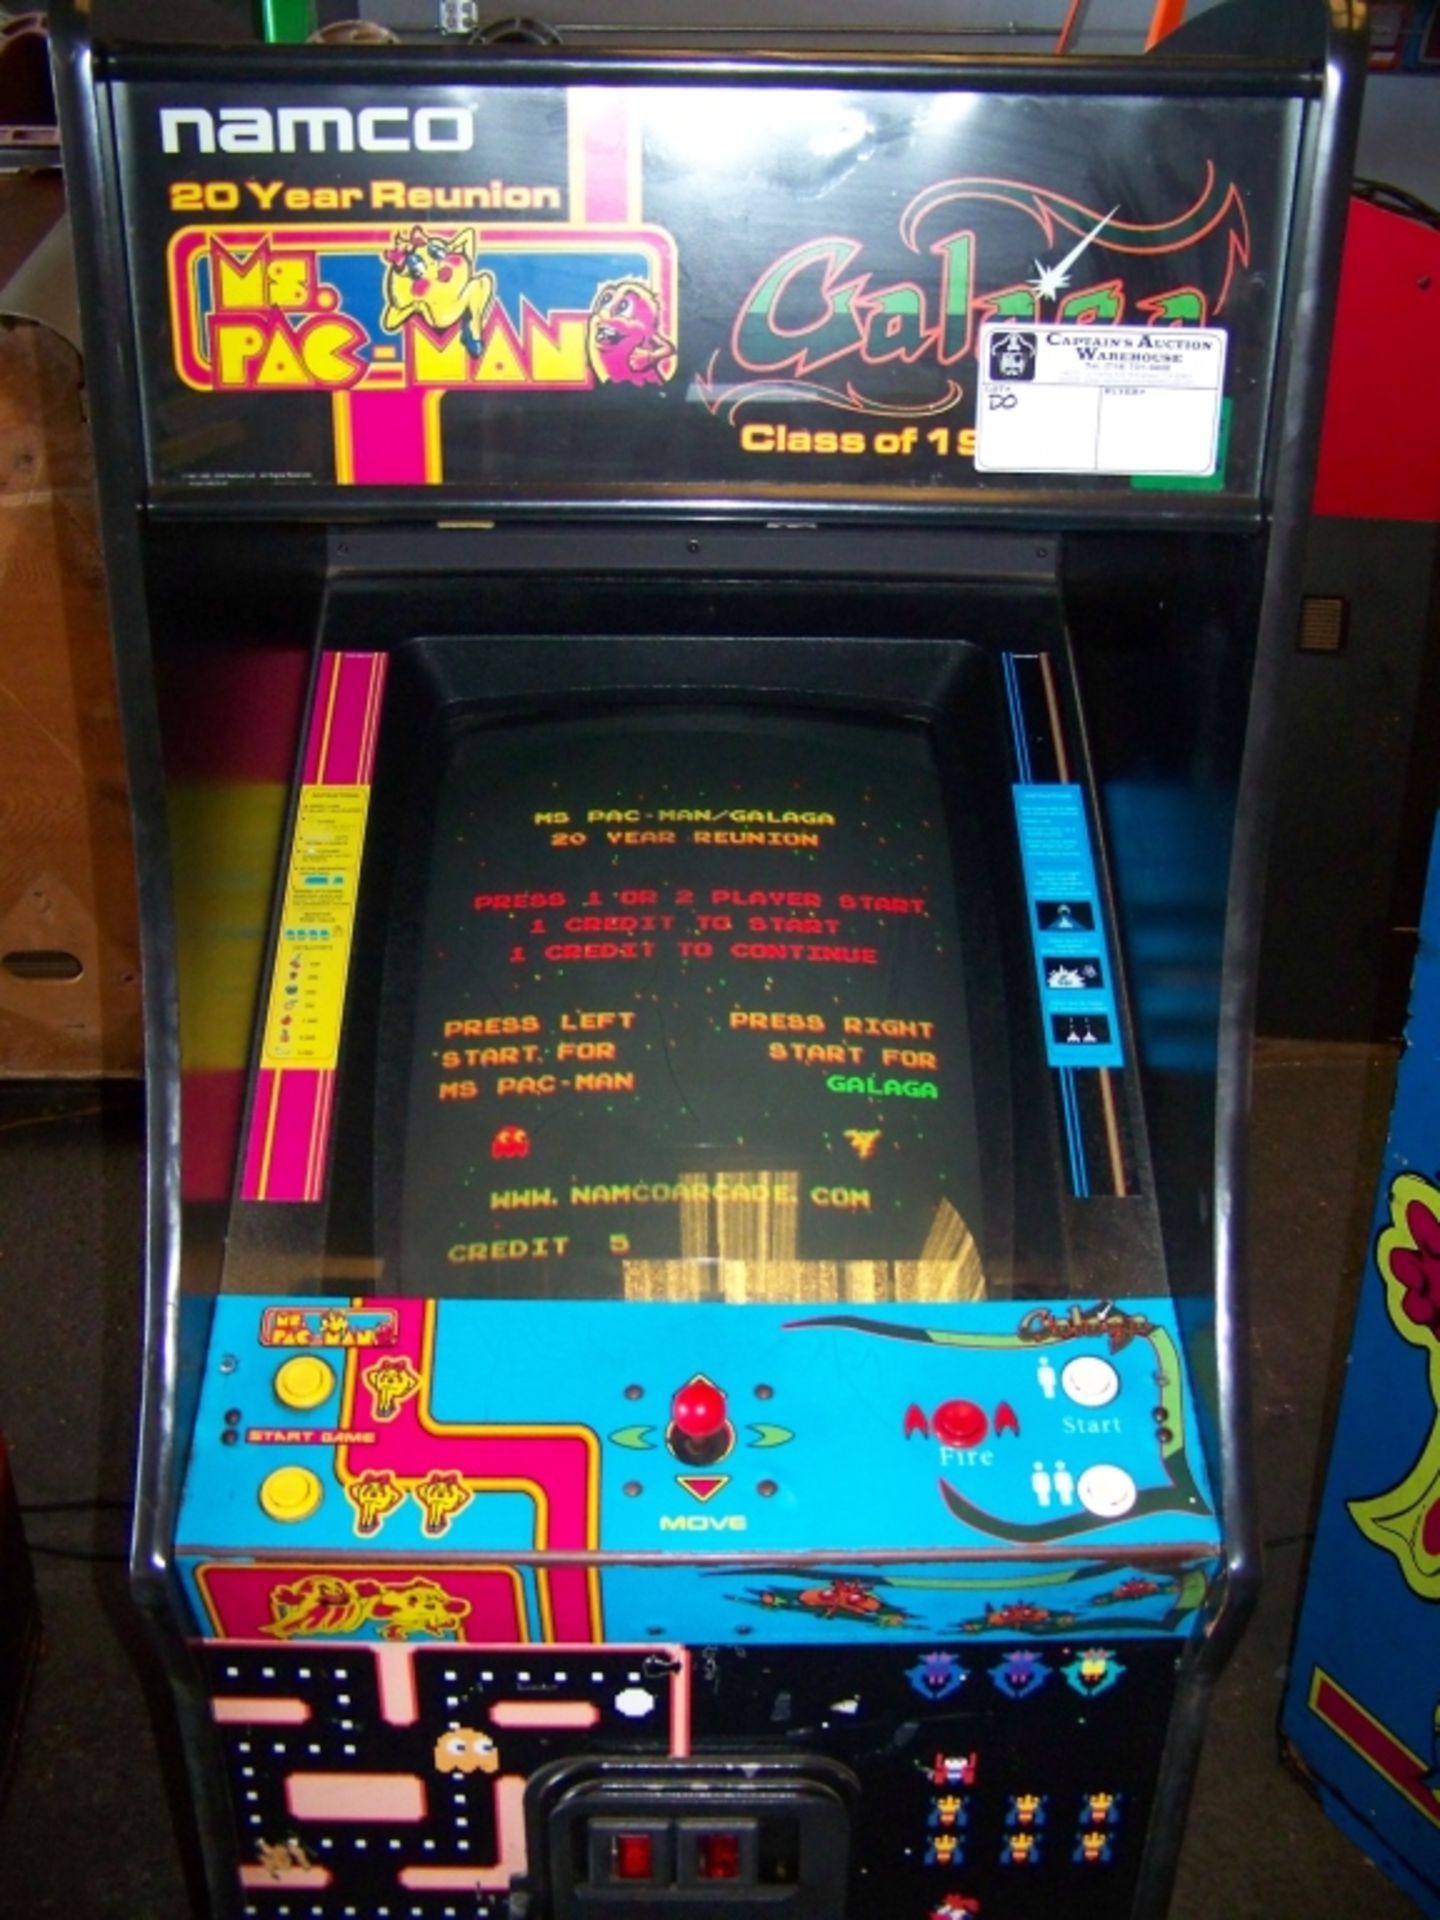 MS. PACMAN GALAGA CLASS OF 1981 ARCADE GAME - Image 4 of 4